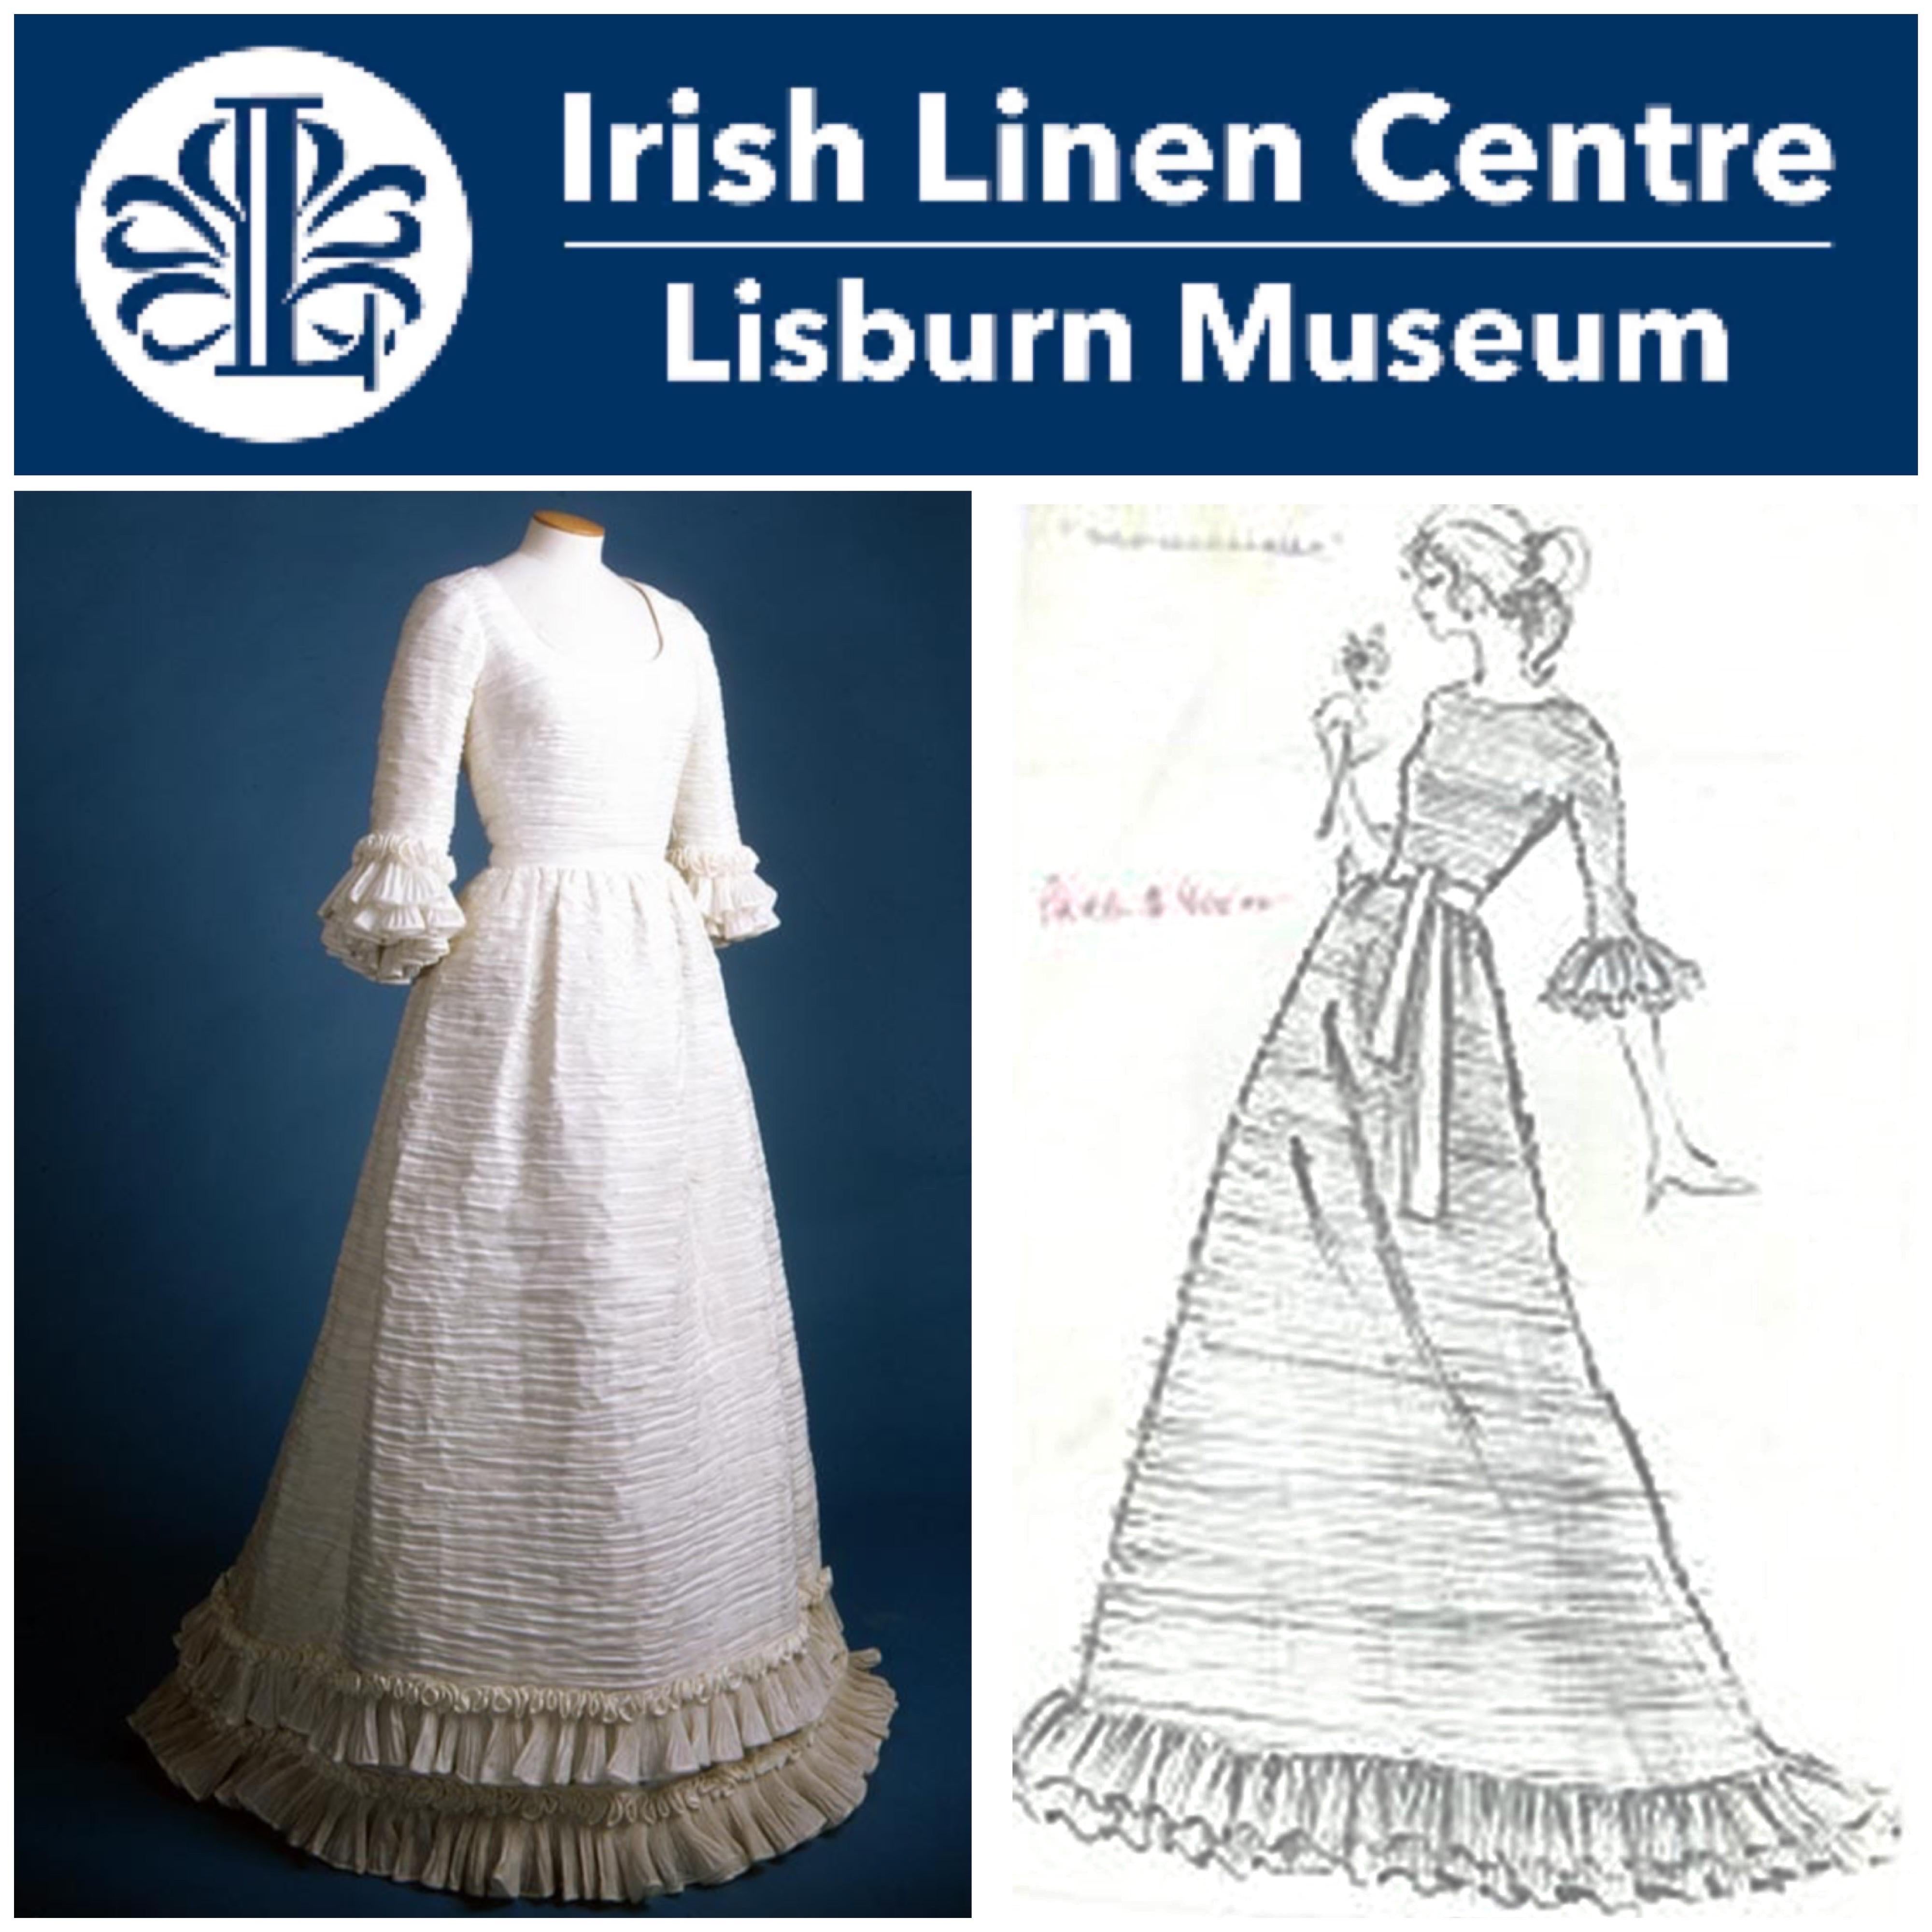 A truly rare and incredibly beautiful Sybil Connolly heavily pleated white linen tea gown dating back to the mid 1960's. As shown, an almost identical dress is archived at The Lisburn Museum in Ireland. Known as the Dior of Dublin, couturier Sybil